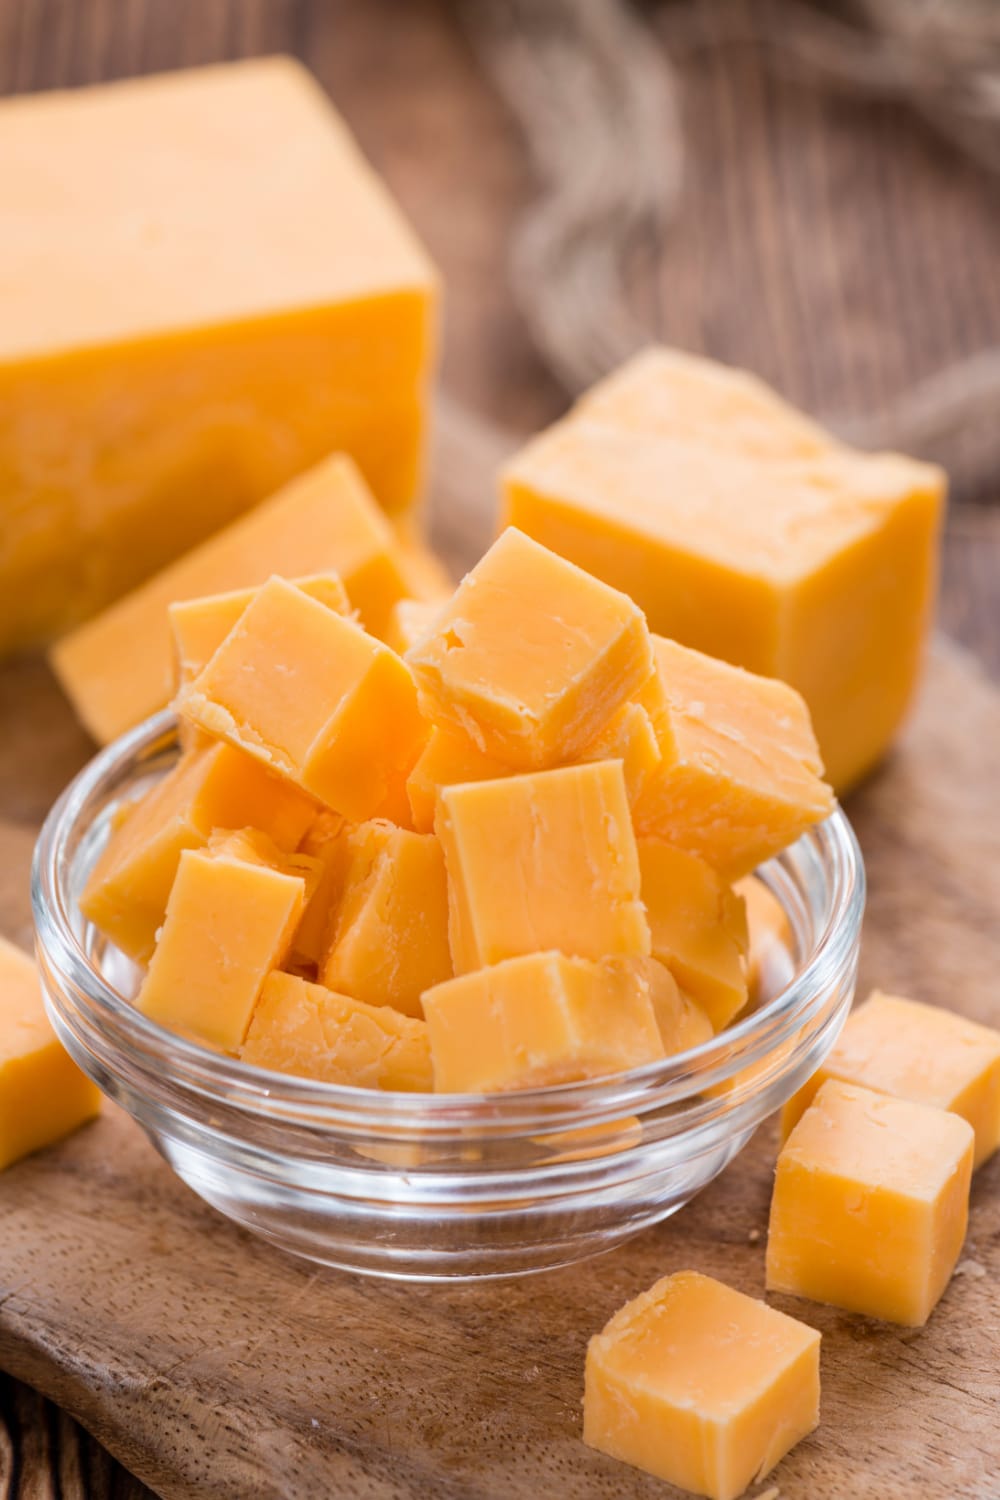 Cheddar Cheese Cubes on a Clear Bowl